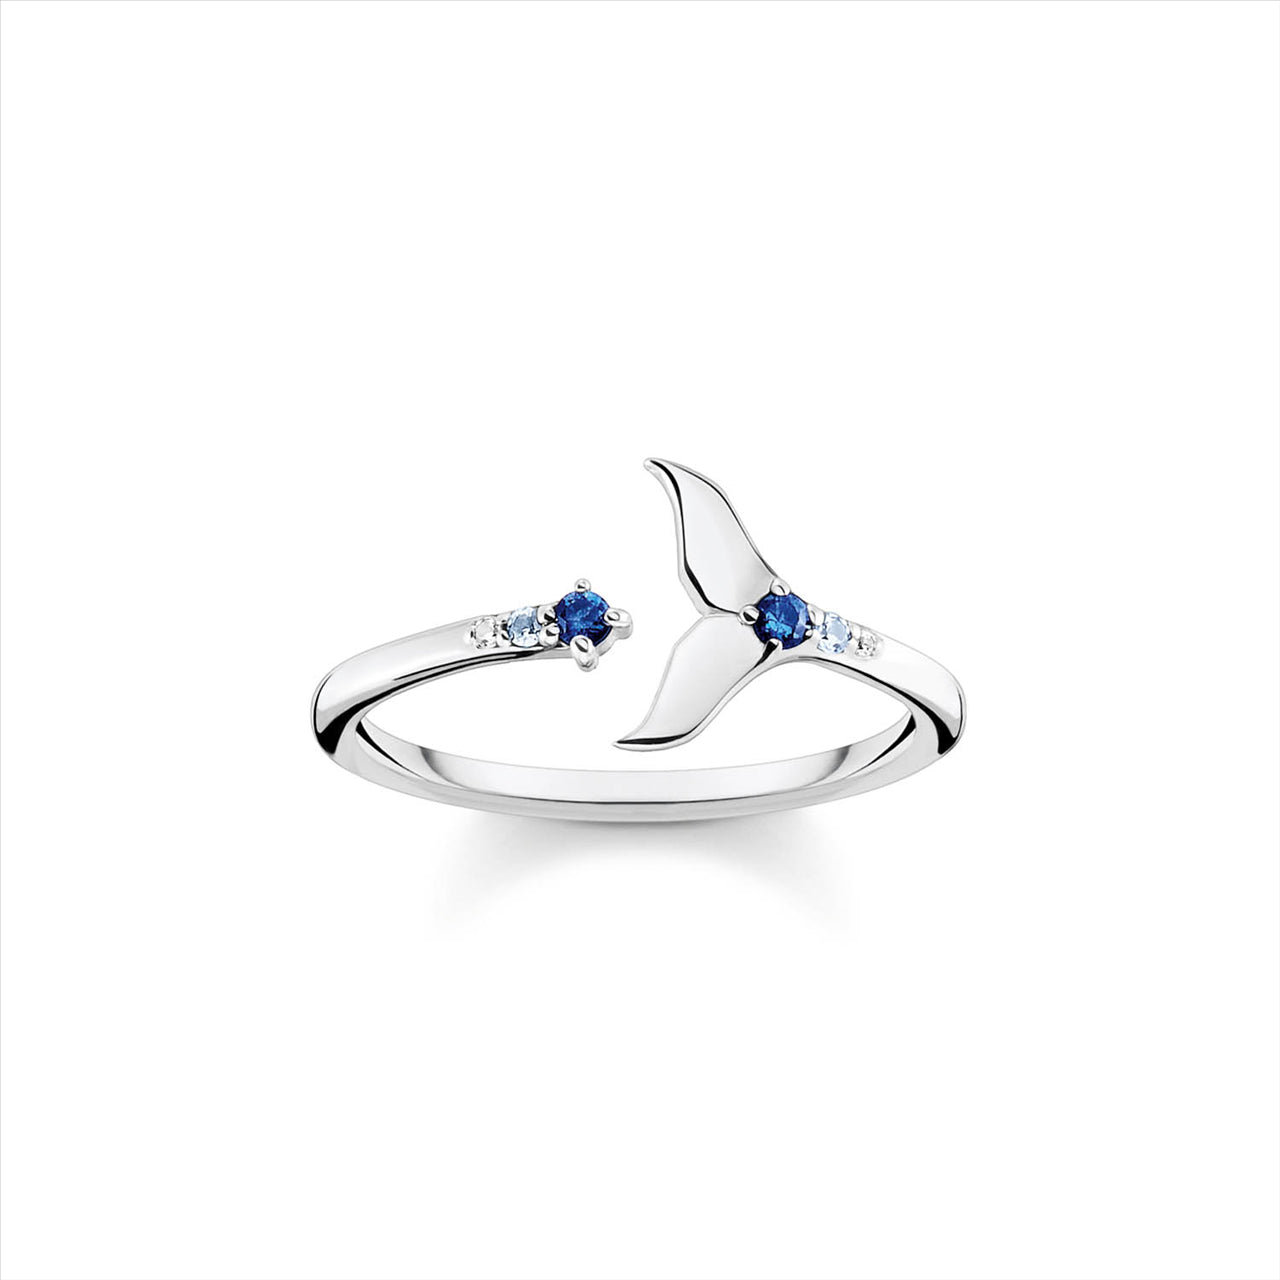 Thomas Sabo "Ocean Vibes" Sterling Silver Dolphin Tail Blue Cubic Zirconia Ring